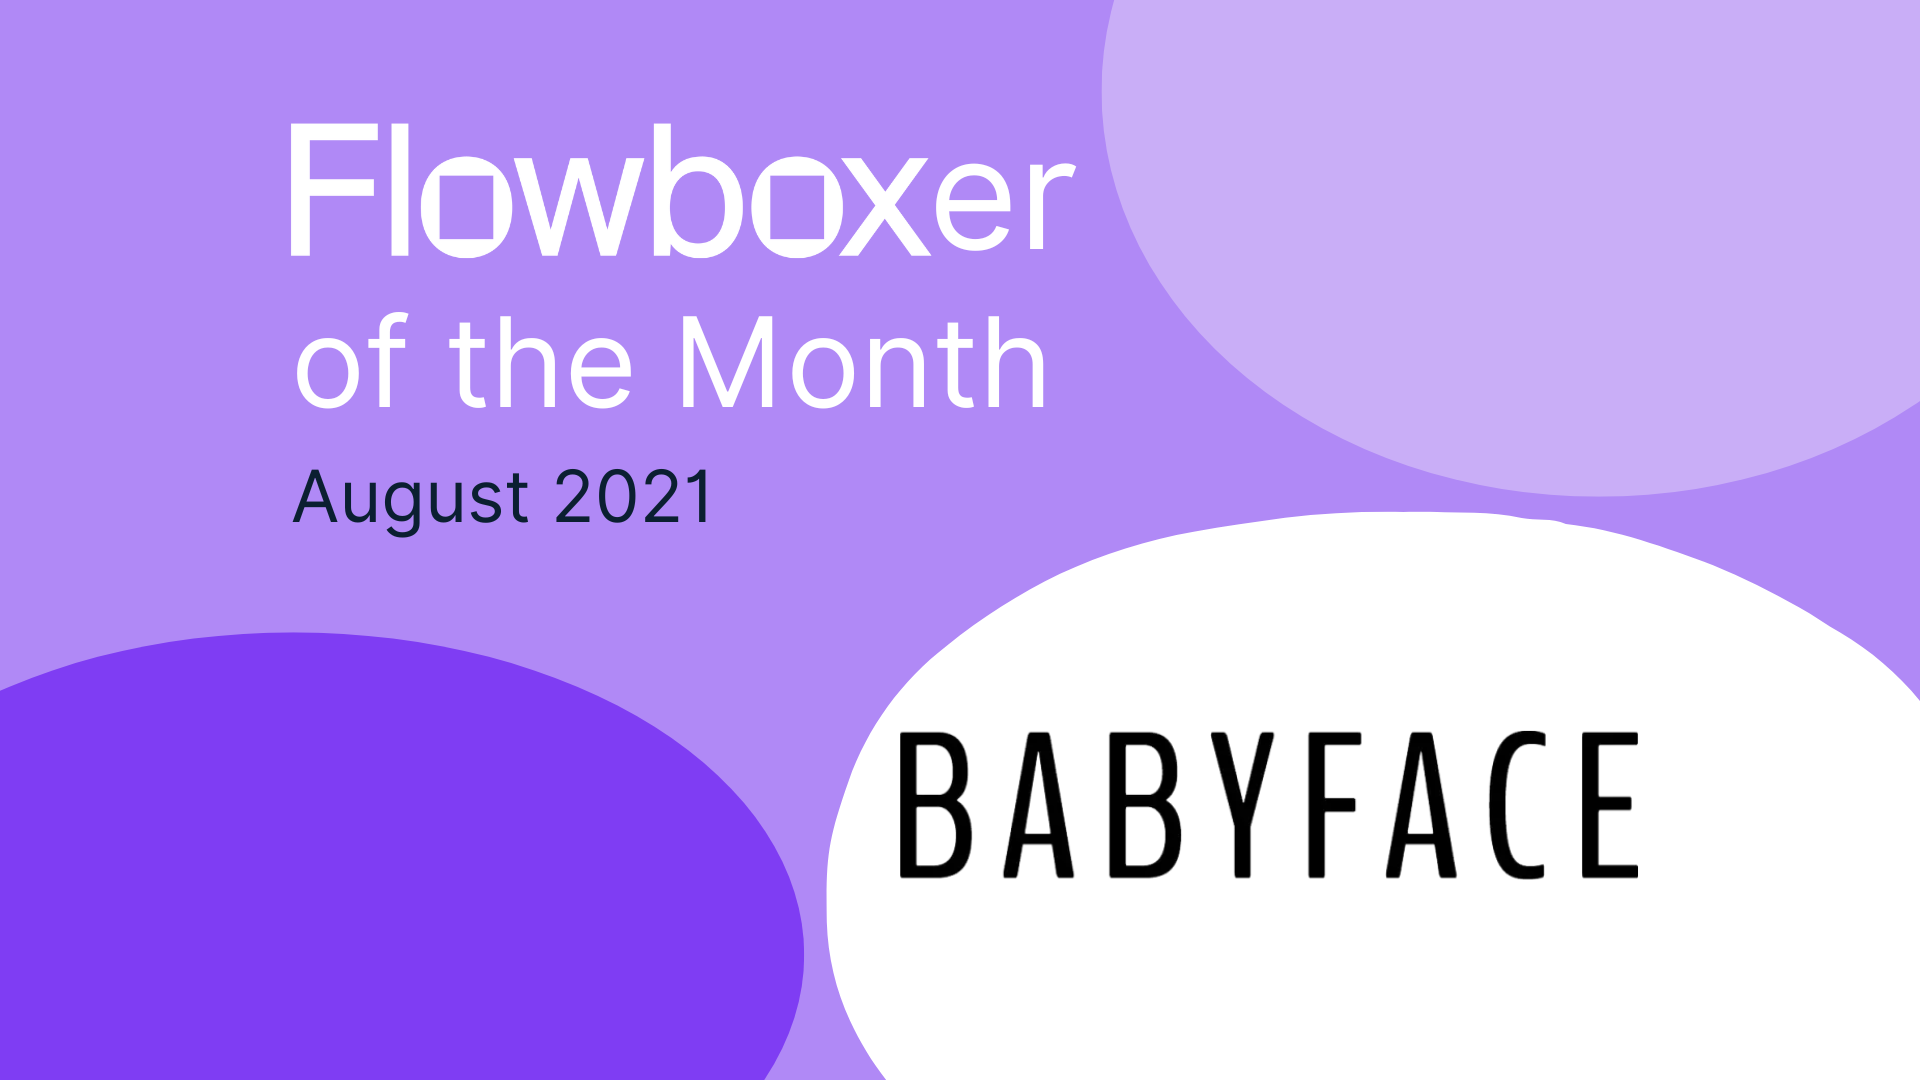 Flowboxer of the month – August 2021: Babyface